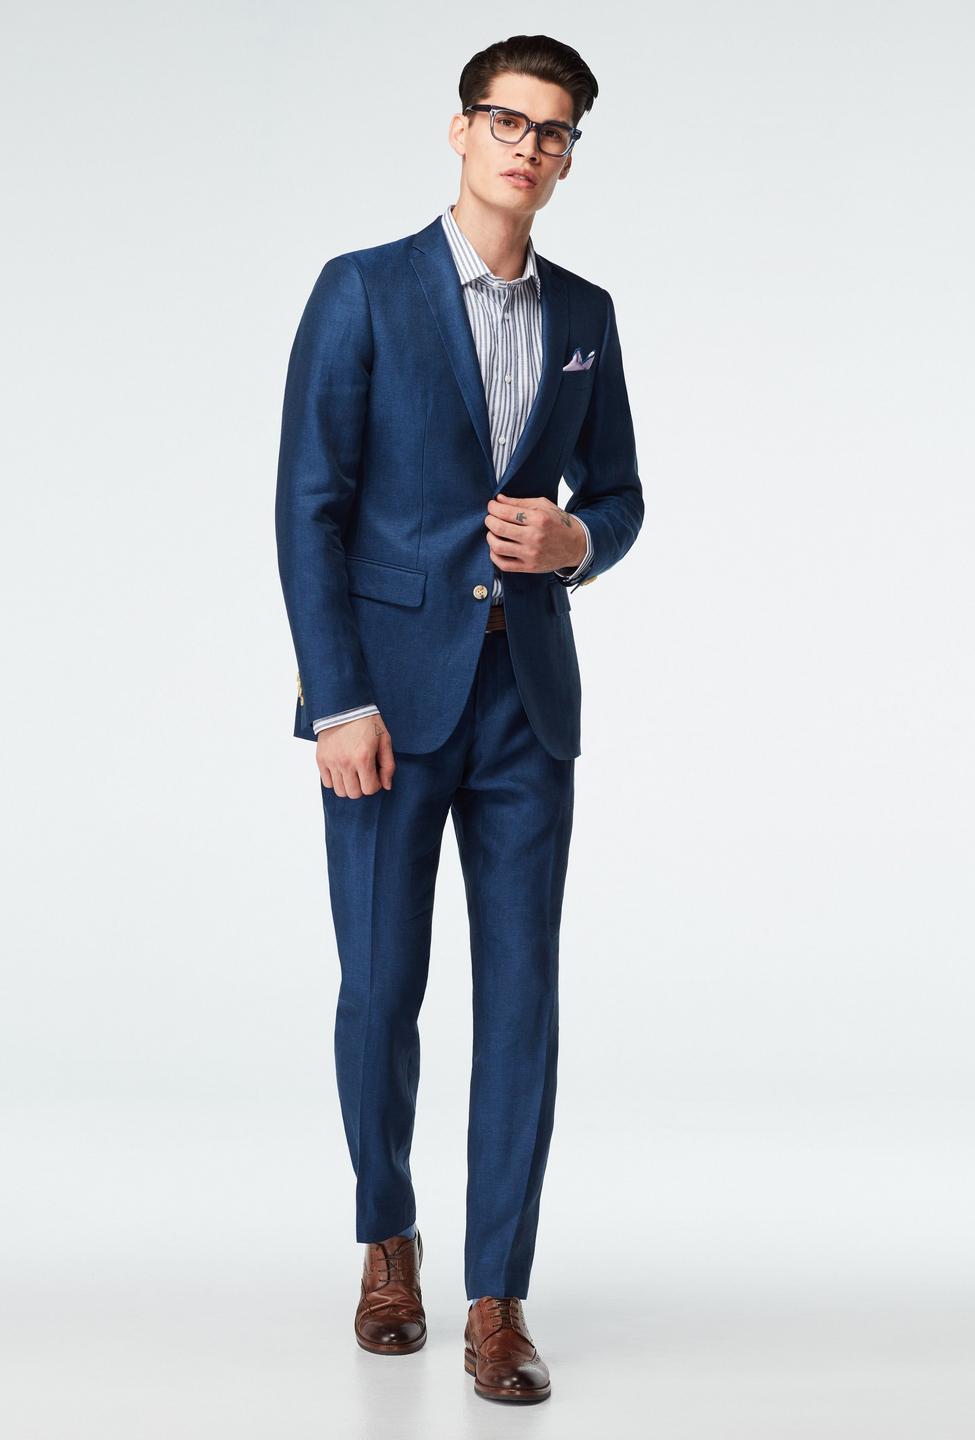 Blue suit - Sailsbury Solid Design from Seasonal Indochino Collection